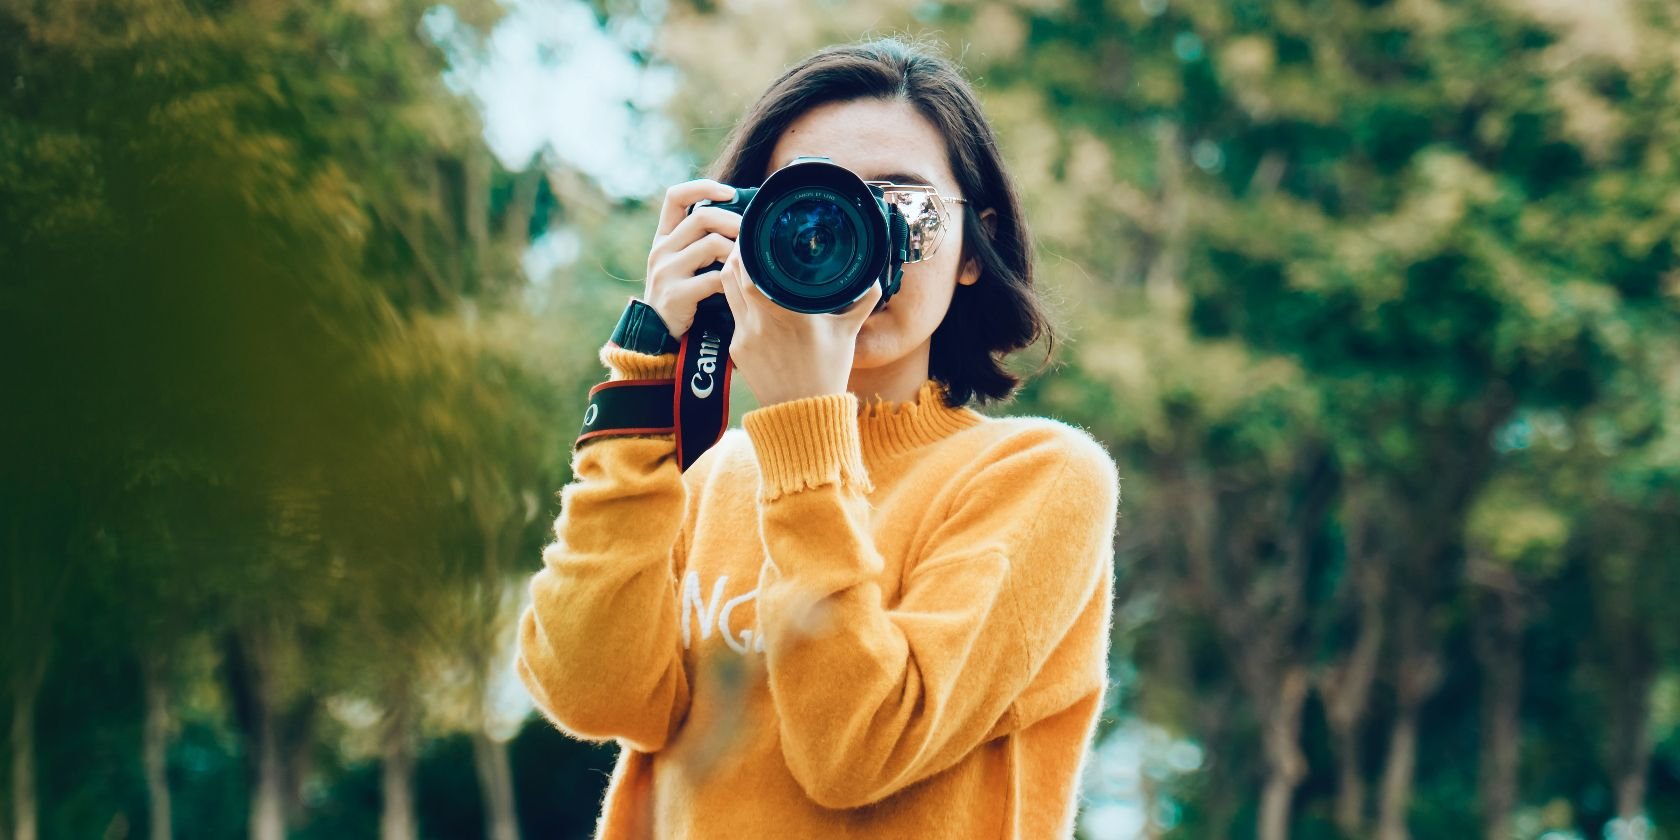 How to Find Your Photography Style: 8 Tips